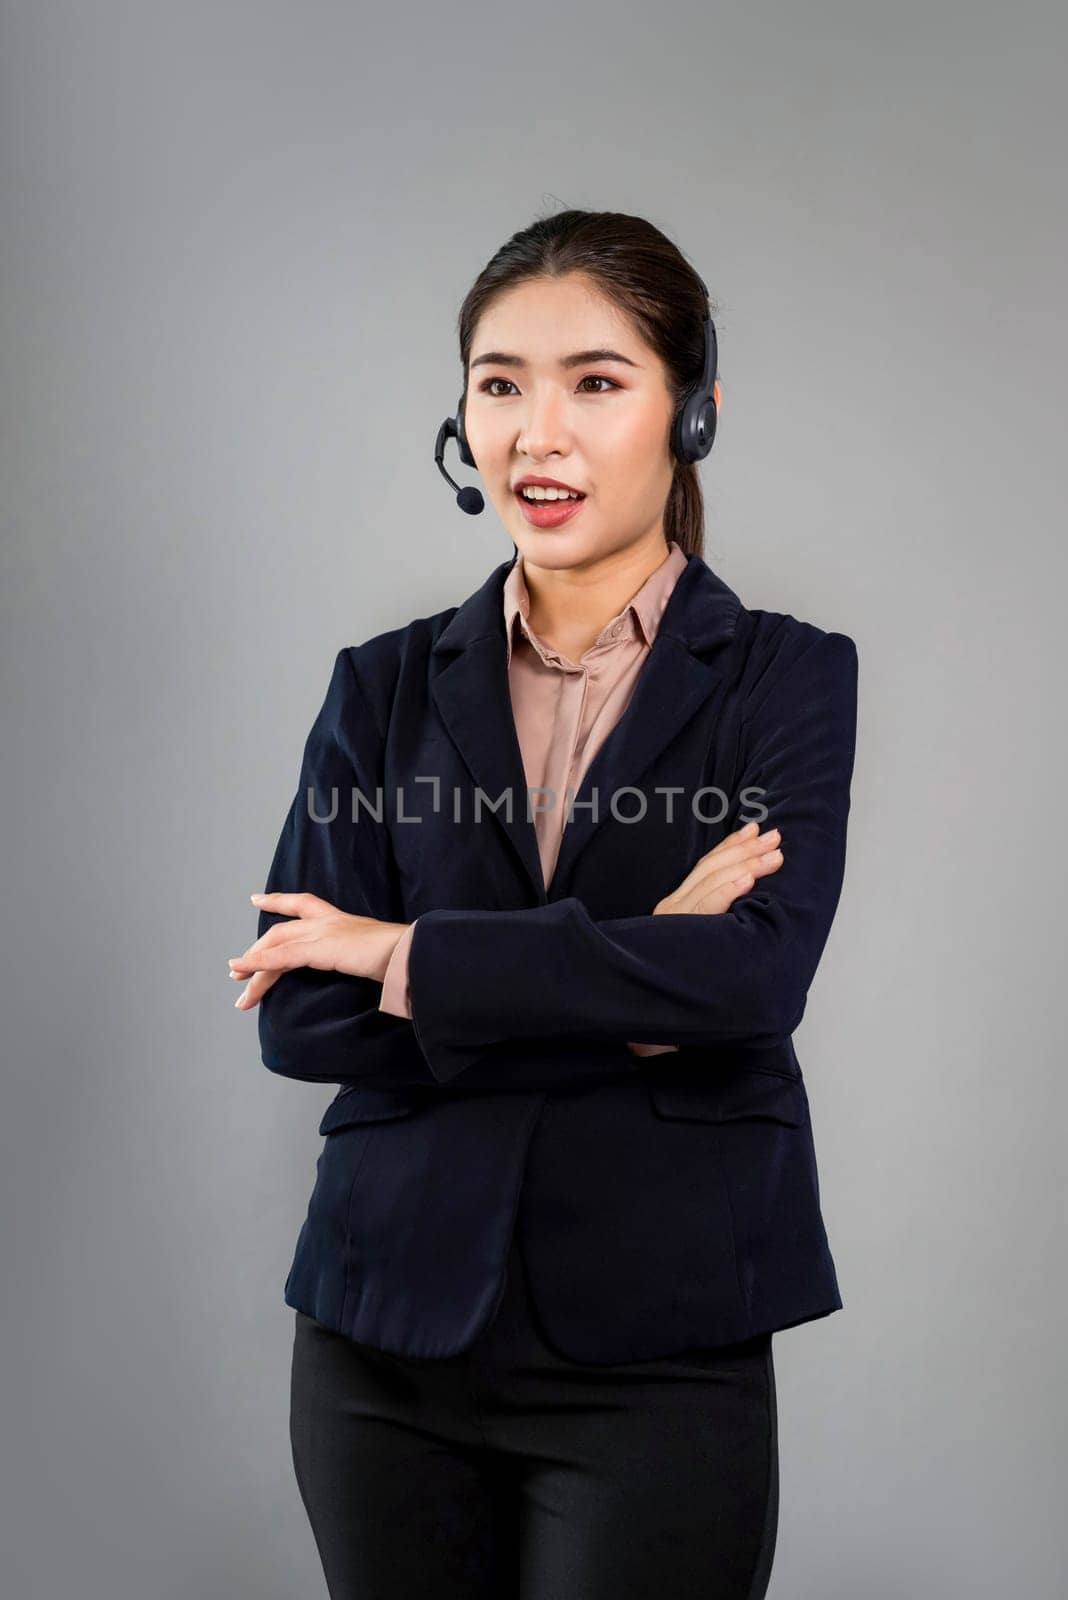 Attractive Asian operator with formal suit and headset. Enthusiastic by biancoblue